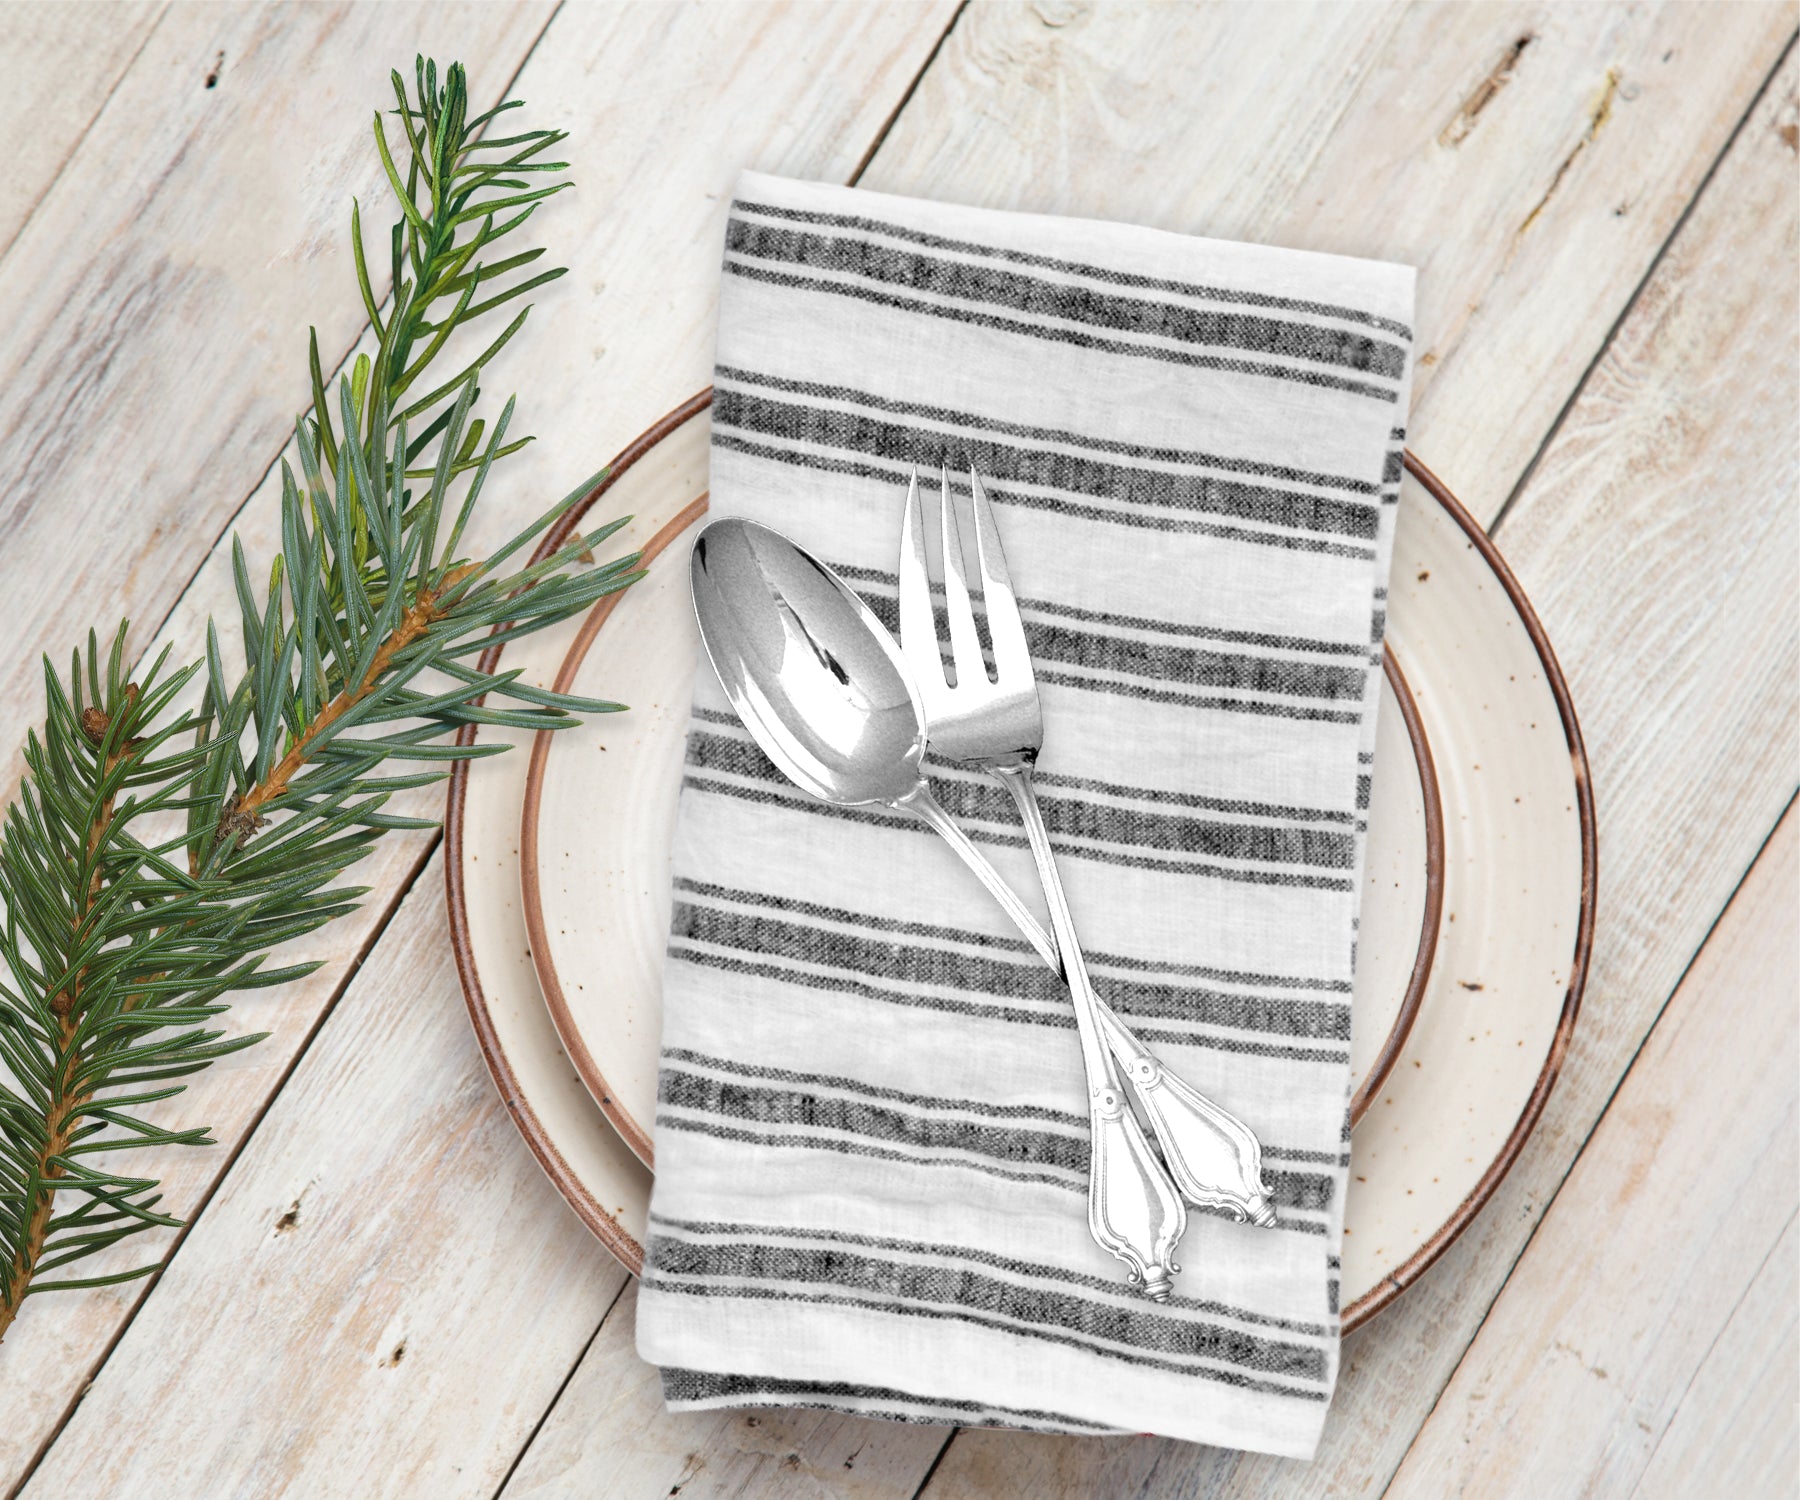 Classic linen napkins perfect for wedding receptions and events.